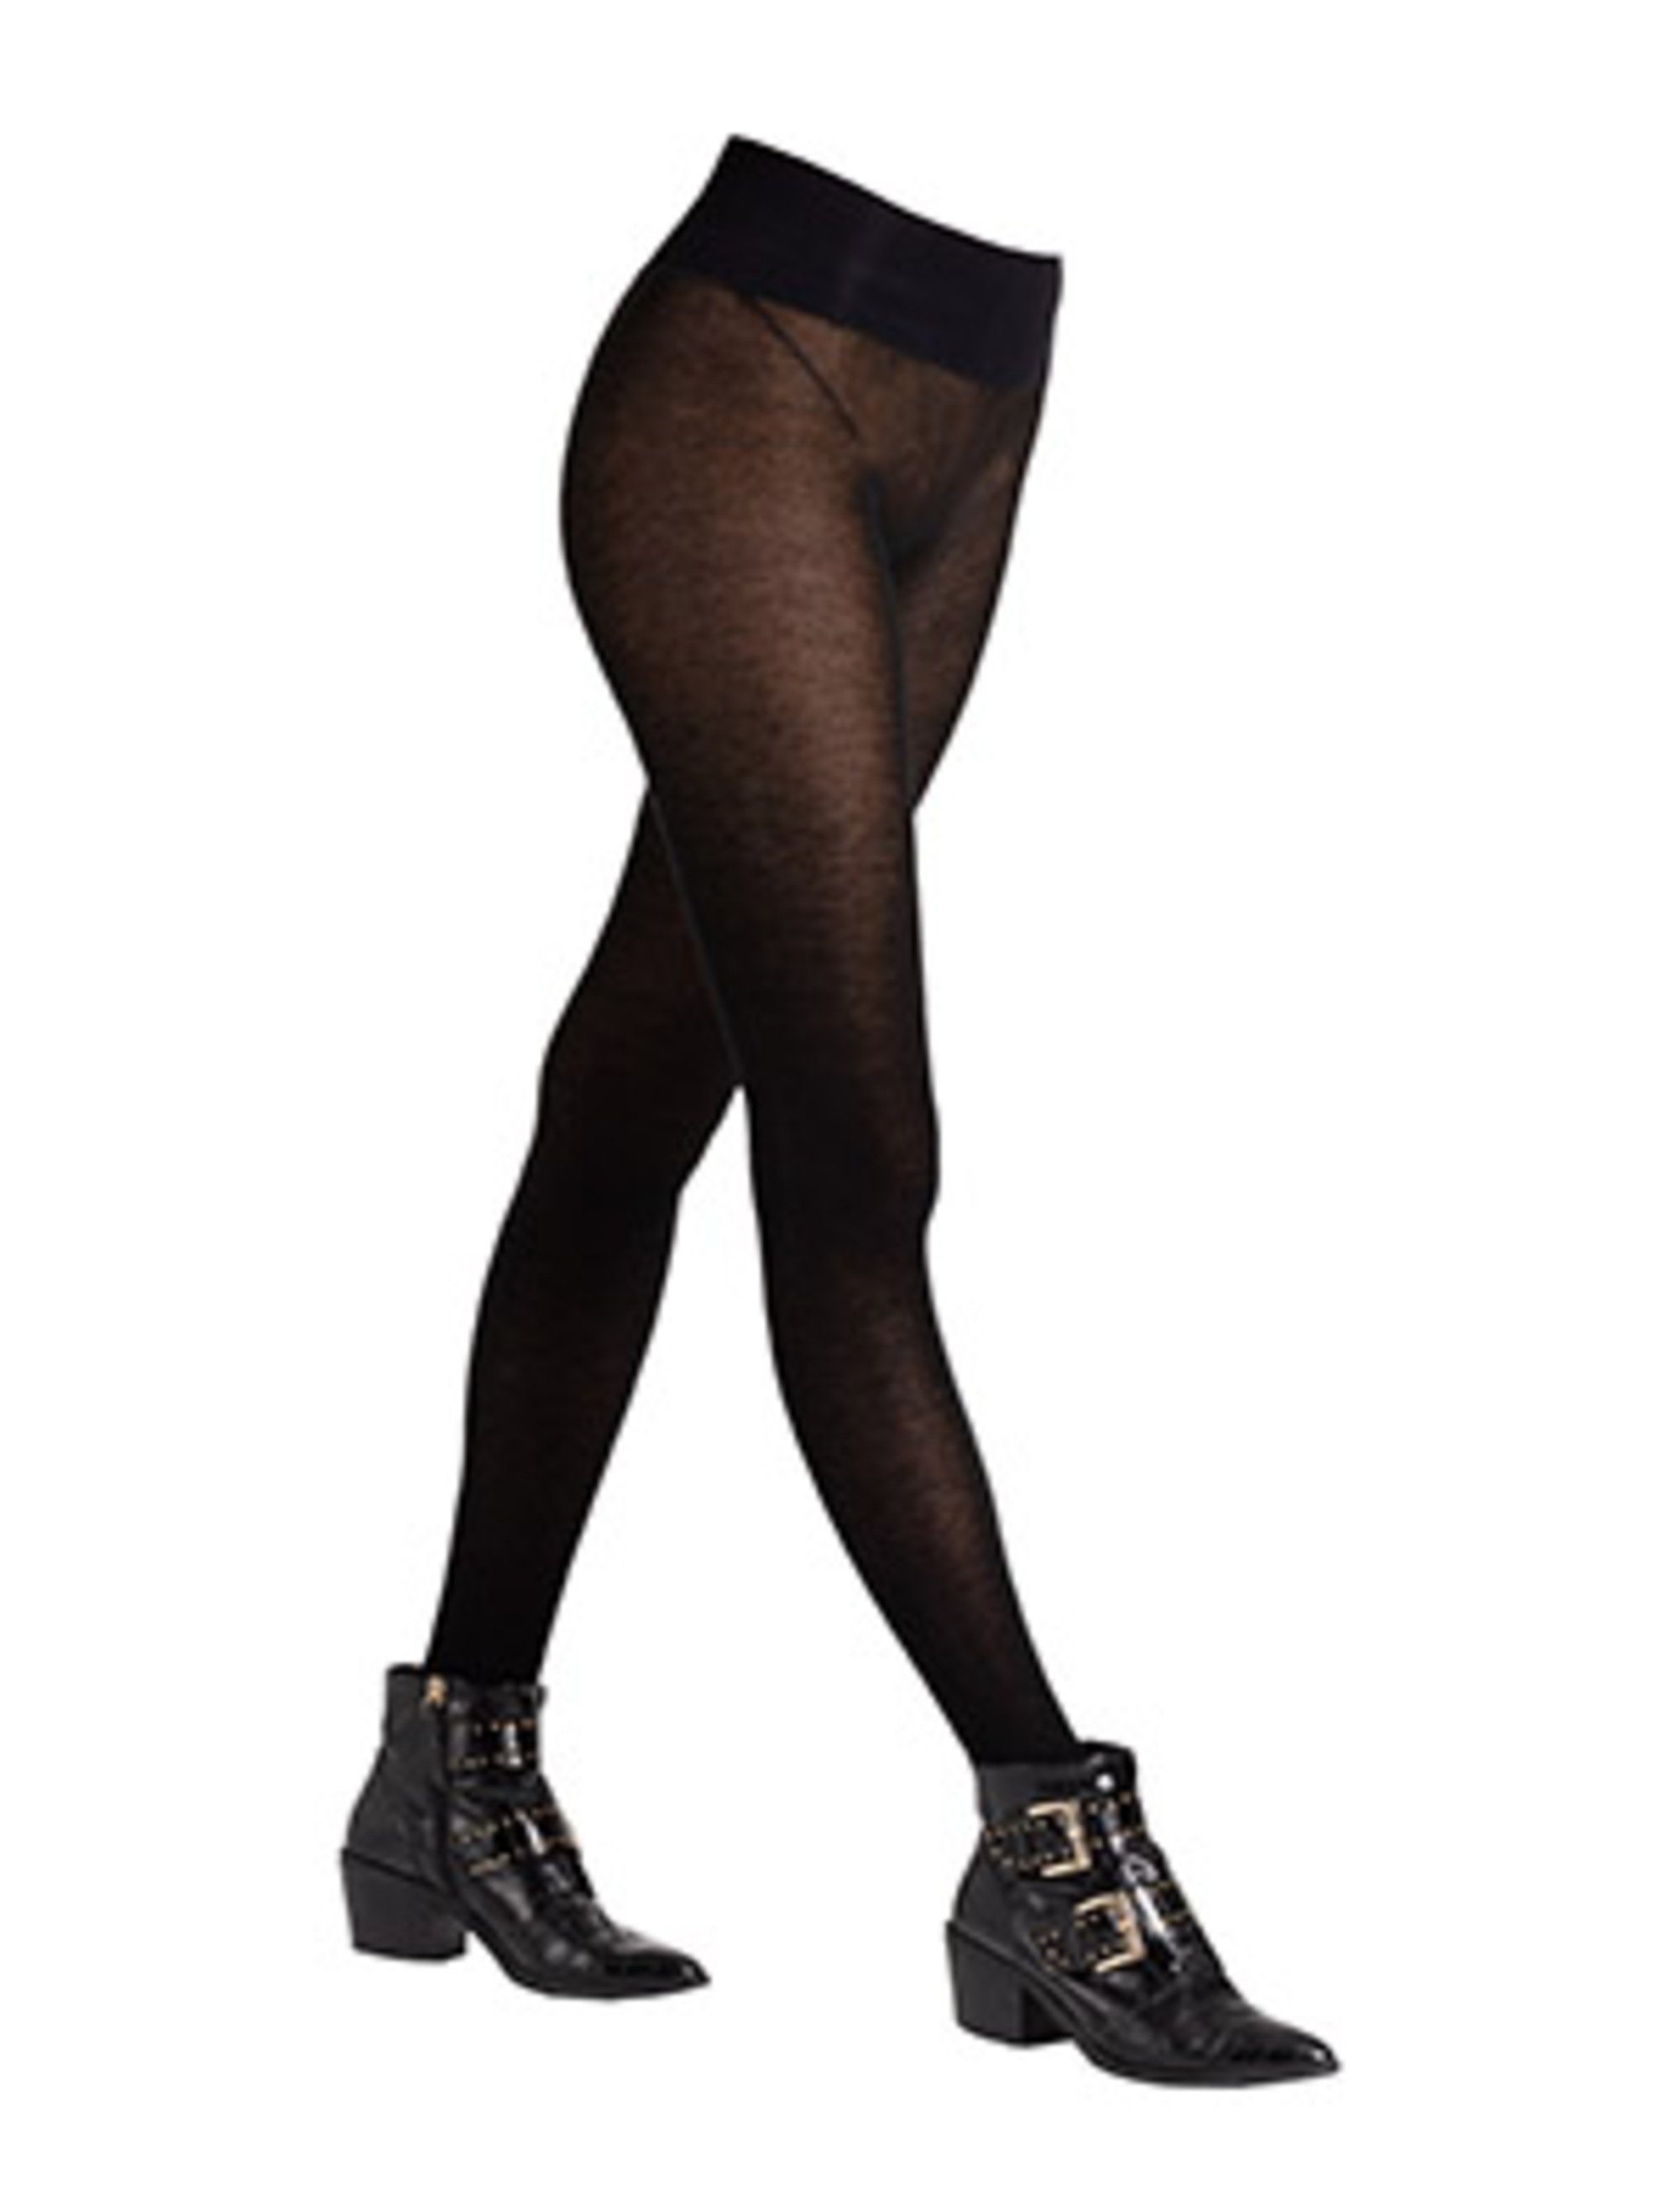 Strumpfhose mit Tragegefühl Too Hot supersoftem Hide Luxurious To St) (1 Lucie